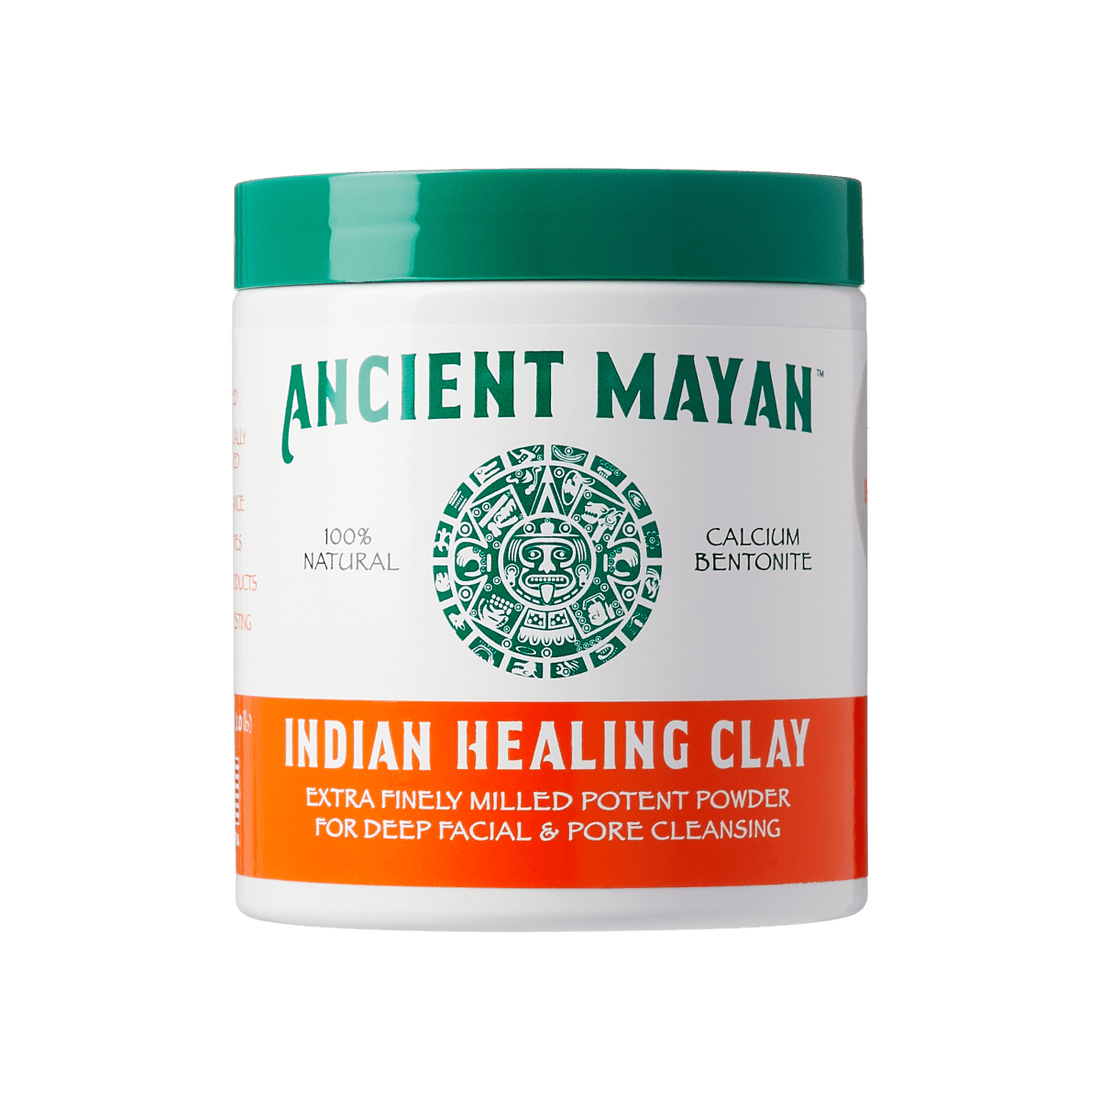 Ancient Mayan Indian Healing Clay powder. Used for deep conditioning hair, detoxifies skin and cleanses pores.